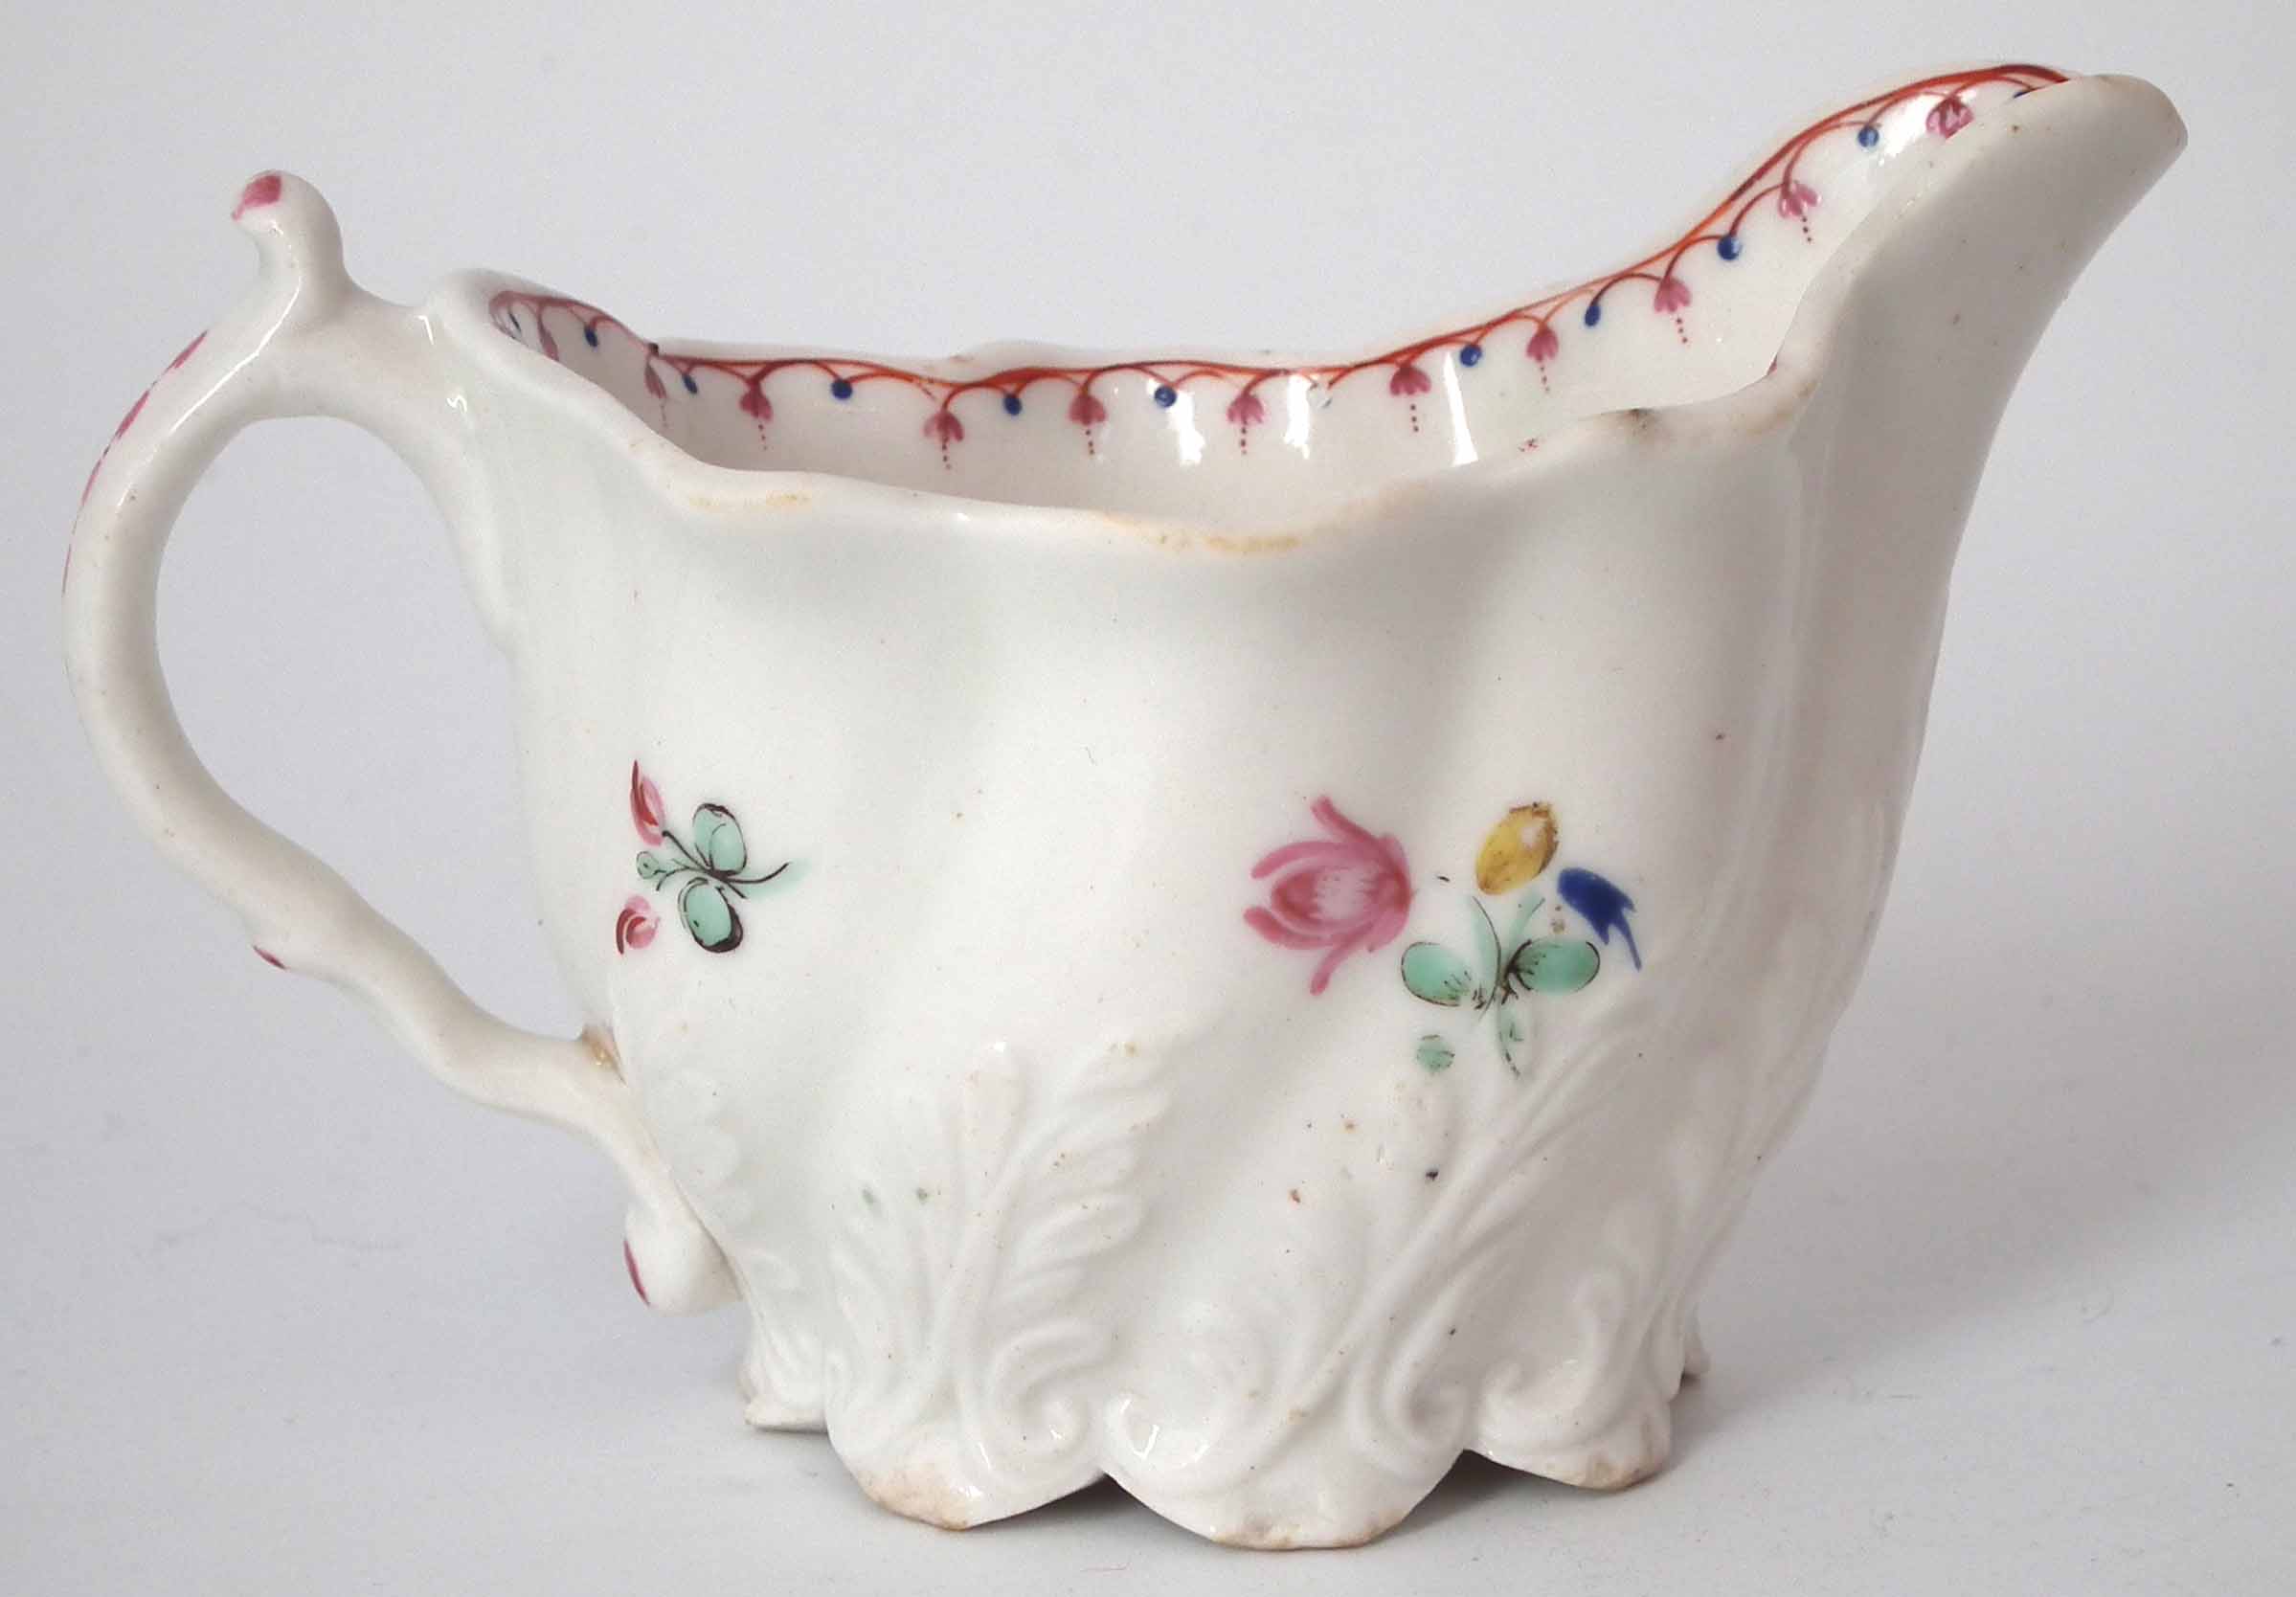 Caughley Low Chelsea Ewer circa 1790, painted with flora and moulded with acanthus leaves, 11cm wide - Image 3 of 6